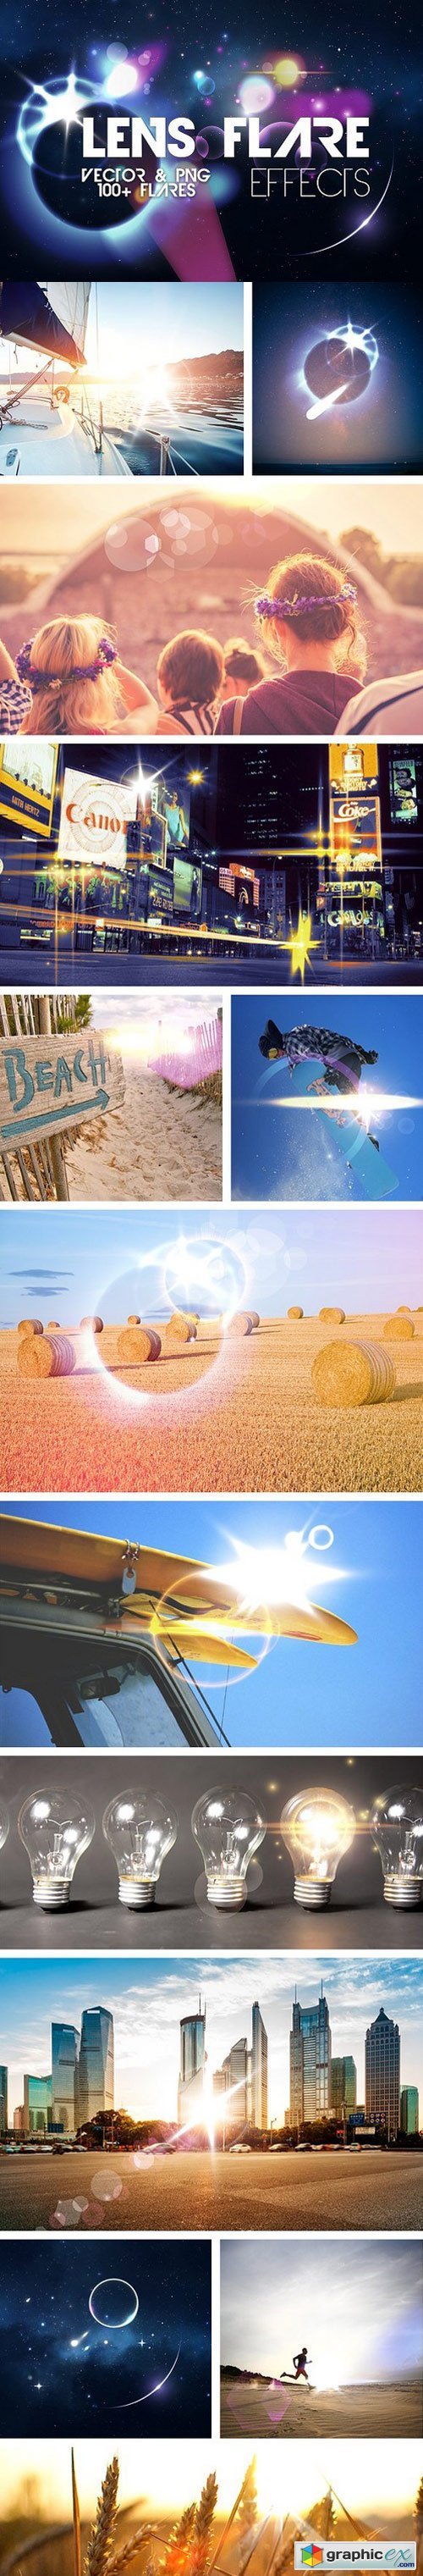 100 Lens Flare Effects